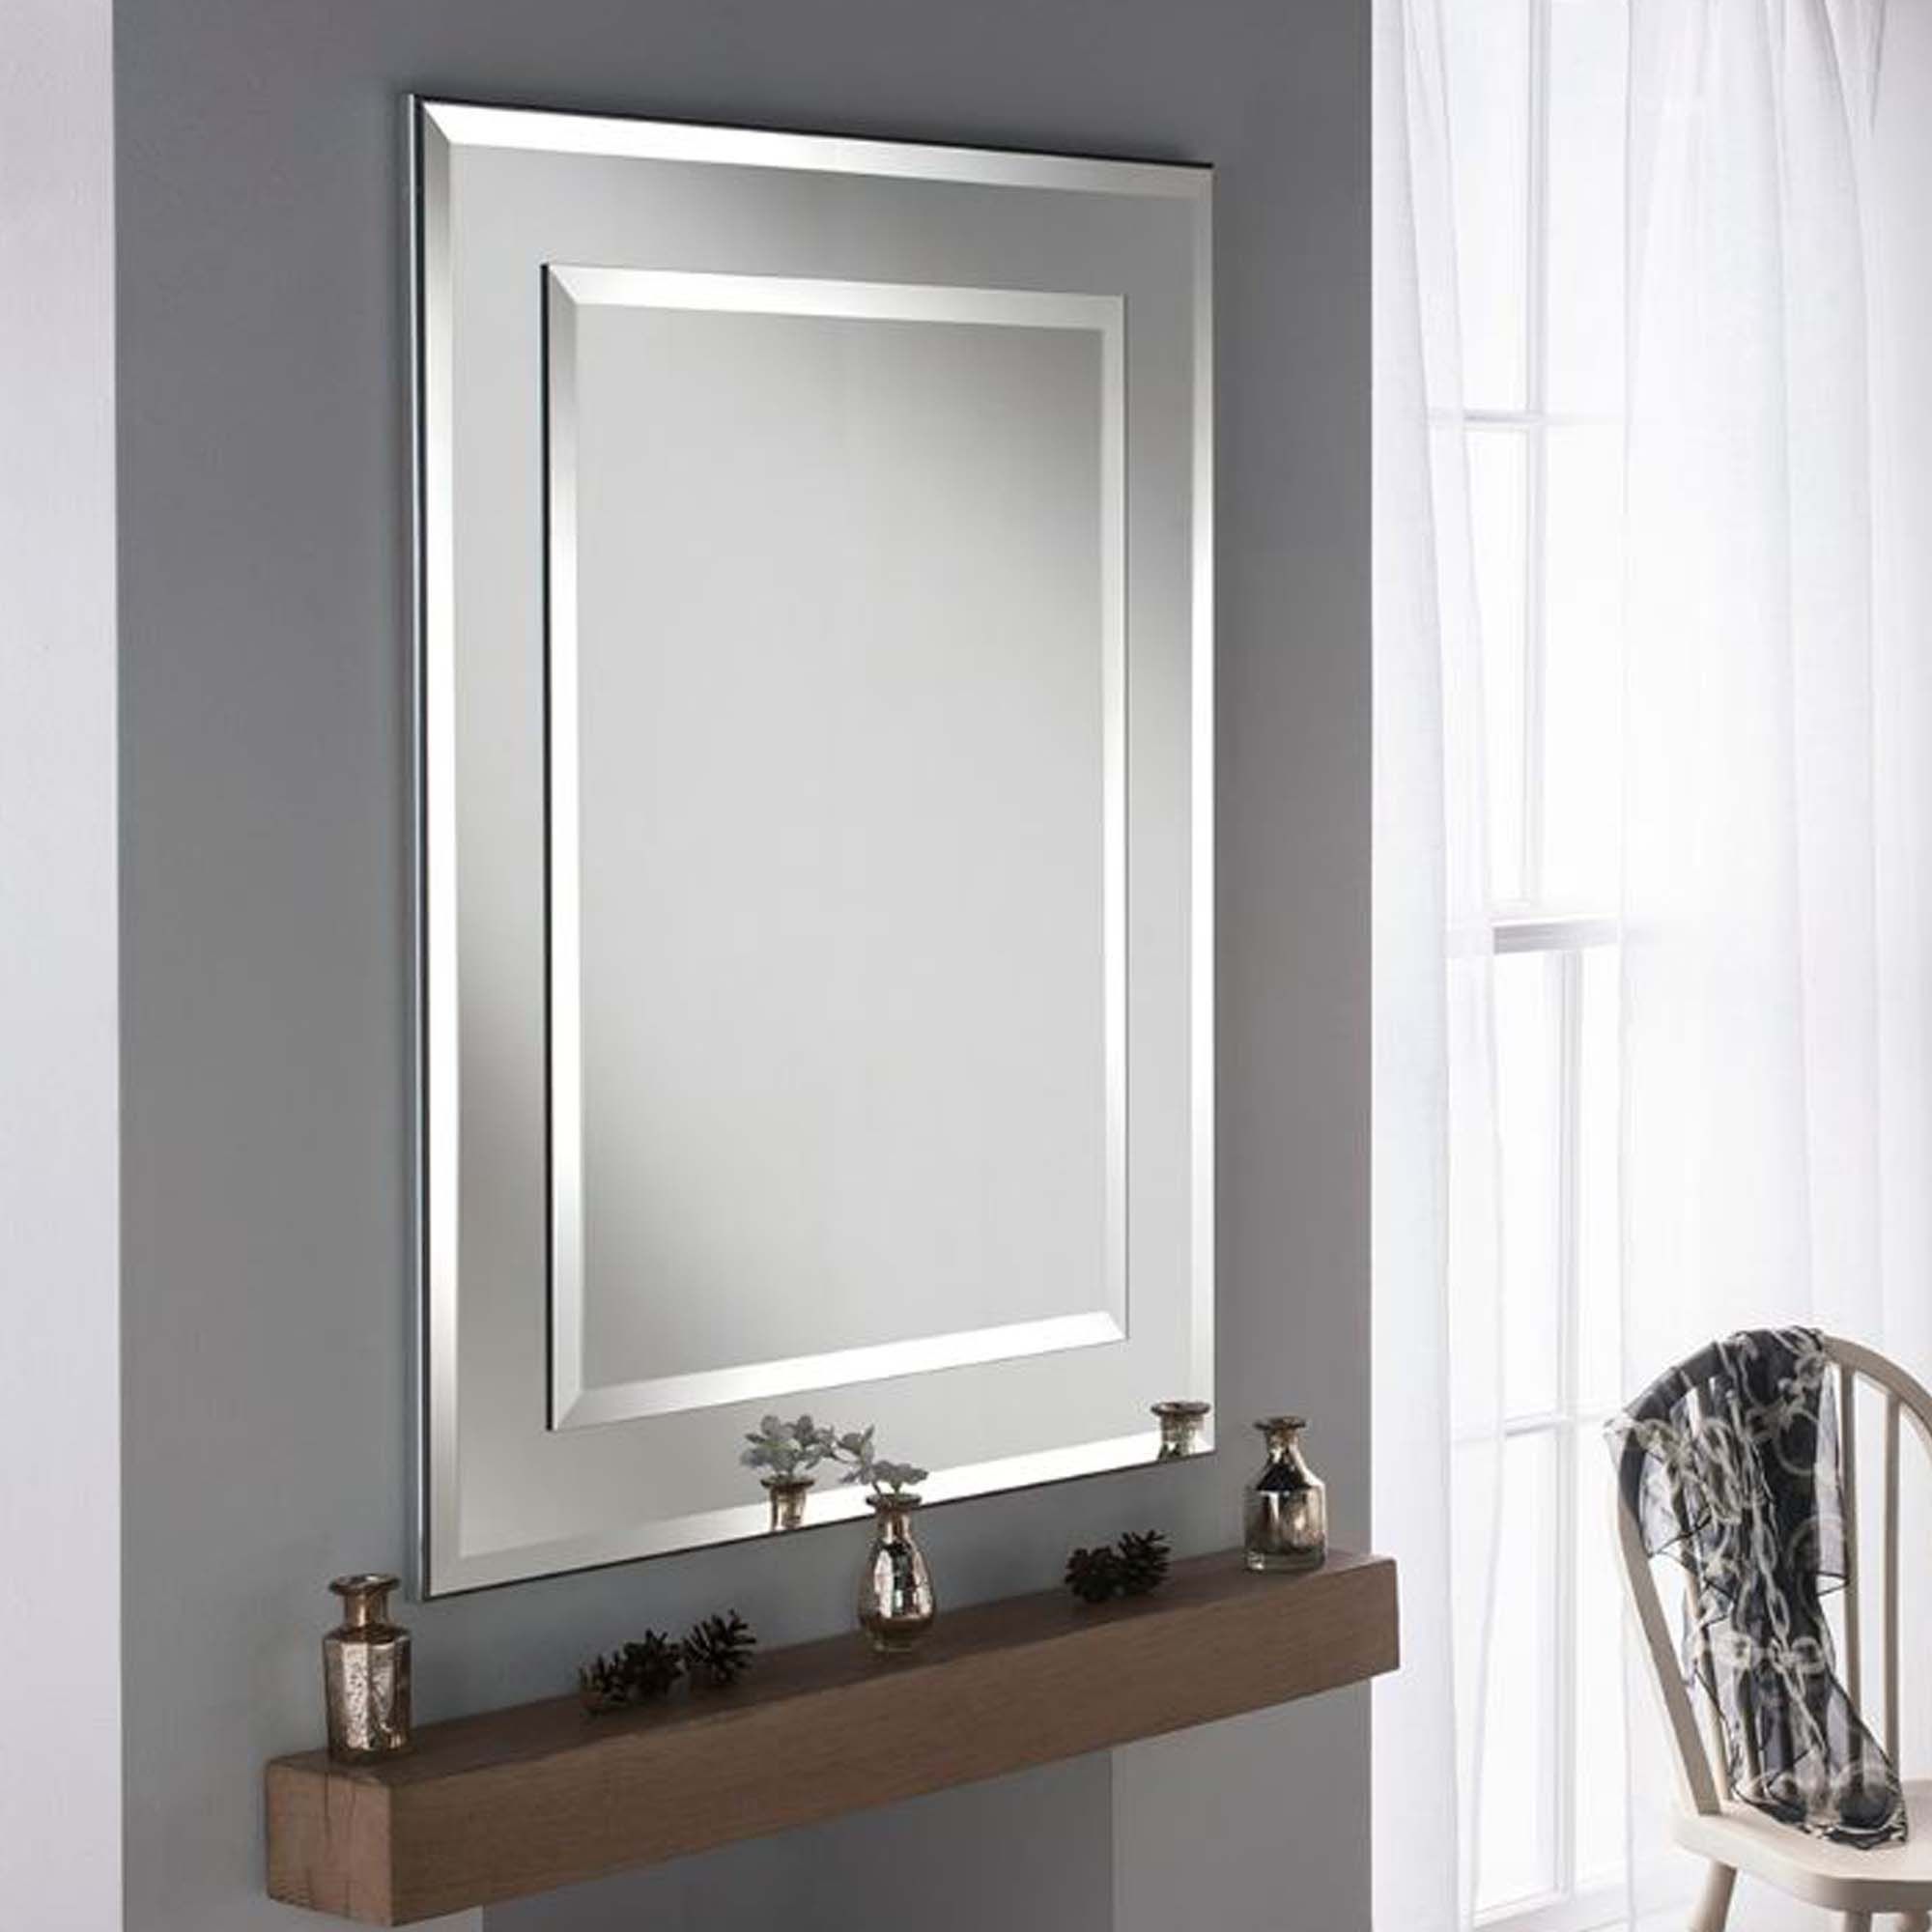 Contemporary Wall Mirror Rectangular Silver Frame | Decor Pertaining To Silver High Wall Mirrors (View 15 of 15)